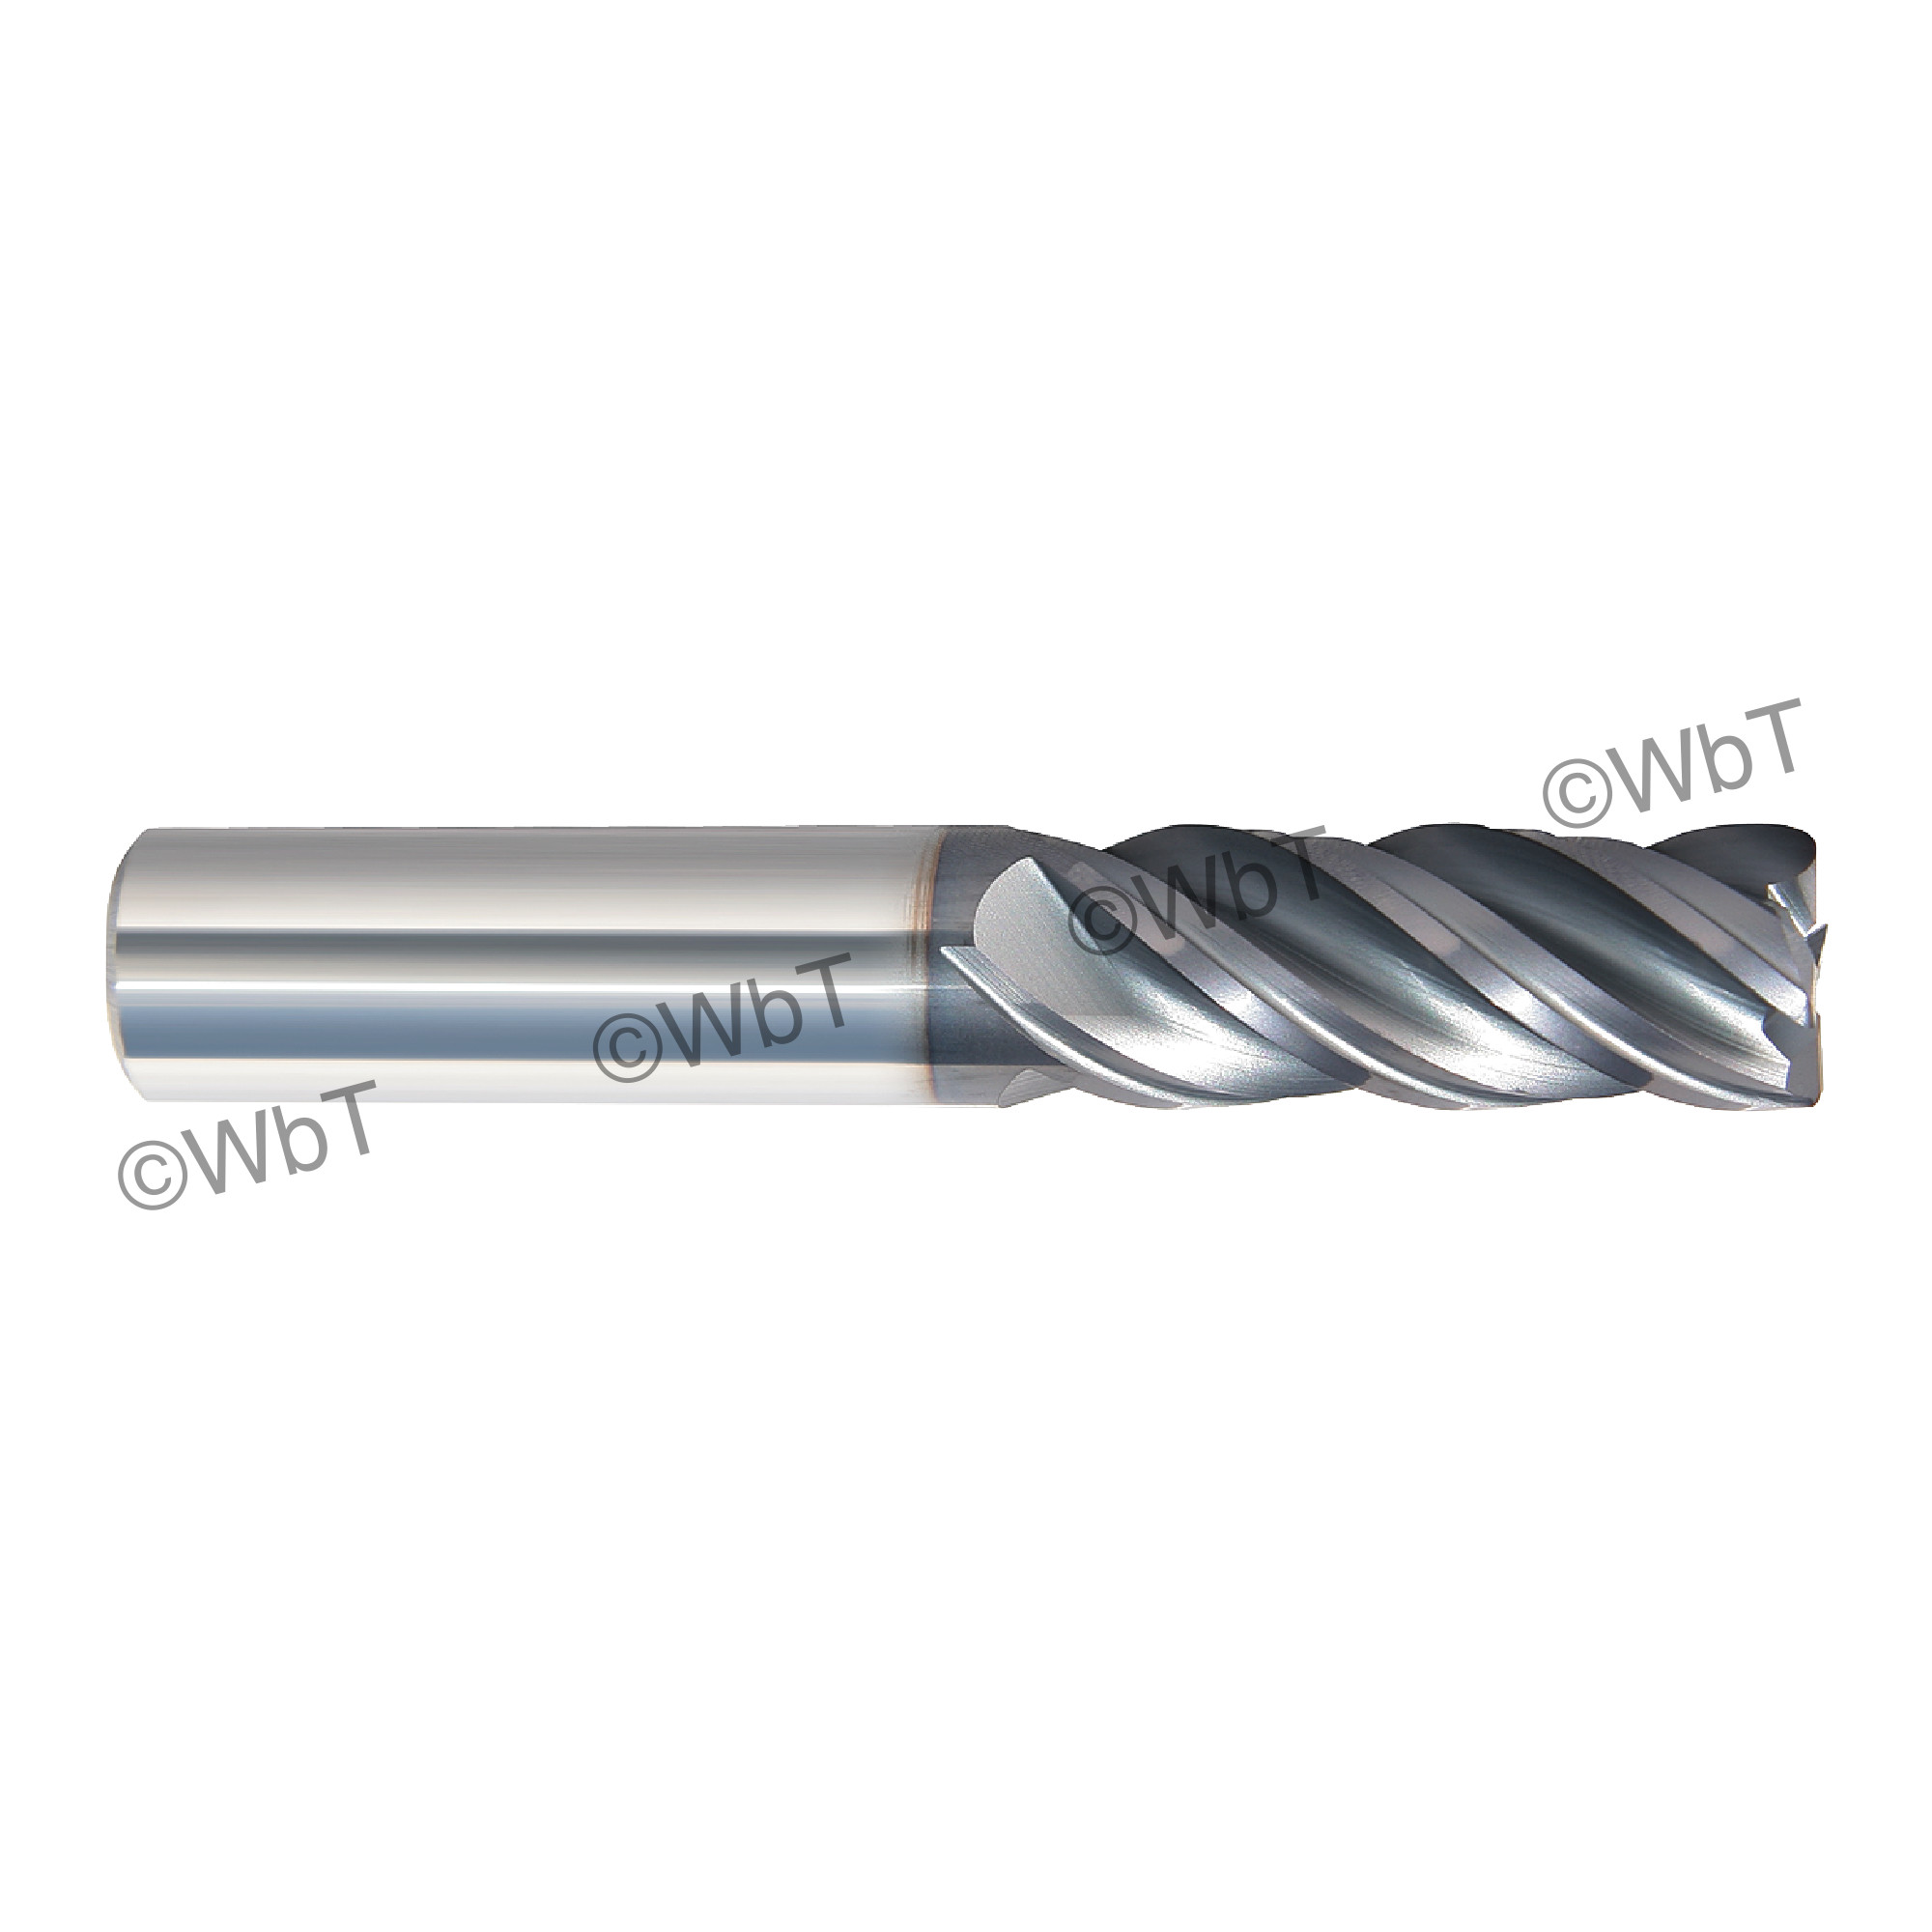 Rushmore USA 3/4" x 2-1/4" Flute Solid Carbide Variable Helix Unequal Index AlTiN Coated Corner Radius 4 Flute Roughing 